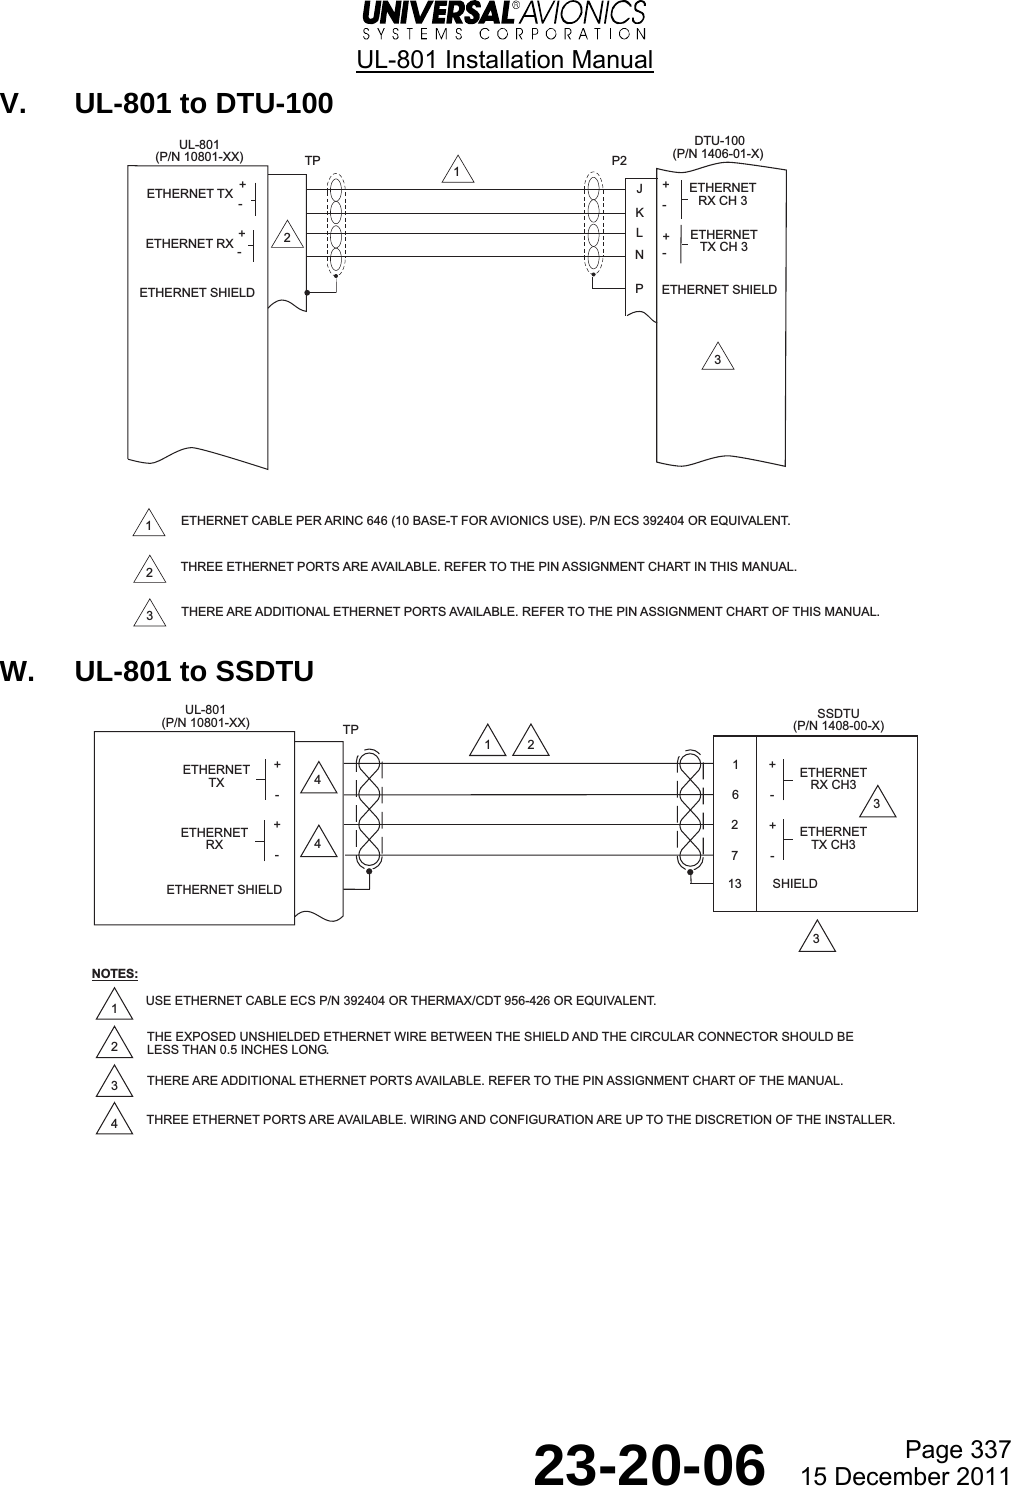  UL-801 Installation Manual  Page 337  23-20-06  15 December 2011 V.  UL-801 to DTU-100  W.  UL-801 to SSDTU     UL-801(P/N 10801-XX) TP+-+-JKLN+-+-ETHERNETRX CH 3ETHERNETTX CH 3 DTU-100(P/N 1406-01-X)P21P2ETHERNET RXETHERNET TXETHERNET SHIELD ETHERNET SHIELD1ETHERNET CABLE PER ARINC 646 (10 BASE-T FOR AVIONICS USE). P/N ECS 392404 OR EQUIVALENT.2THREE ETHERNET PORTS ARE AVAILABLE. REFER TO THE PIN ASSIGNMENT CHART IN THIS MANUAL.3THERE ARE ADDITIONAL ETHERNET PORTS AVAILABLE. REFER TO THE PIN ASSIGNMENT CHART OF THIS MANUAL.36271ETHERNETRX CH3ETHERNETTX CH313 SHIELD+-+-1TPETHERNETRXETHERNETTXUL-801(P/N 10801-XX)ETHERNET SHIELD+-+-244NOTES:2THE EXPOSED UNSHIELDED ETHERNET WIRE BETWEEN THE SHIELD AND THE CIRCULAR CONNECTOR SHOULD BELESS THAN 0.5 INCHES LONG.3THERE ARE ADDITIONAL ETHERNET PORTS AVAILABLE. REFER TO THE PIN ASSIGNMENT CHART OF THE MANUAL.USE ETHERNET CABLE ECS P/N 392404 OR THERMAX/CDT 956-426 OR EQUIVALENT.14THREE ETHERNET PORTS ARE AVAILABLE. WIRING AND CONFIGURATION ARE UP TO THE DISCRETION OF THE INSTALLER.3SSDTU(P/N 1408-00-X)3